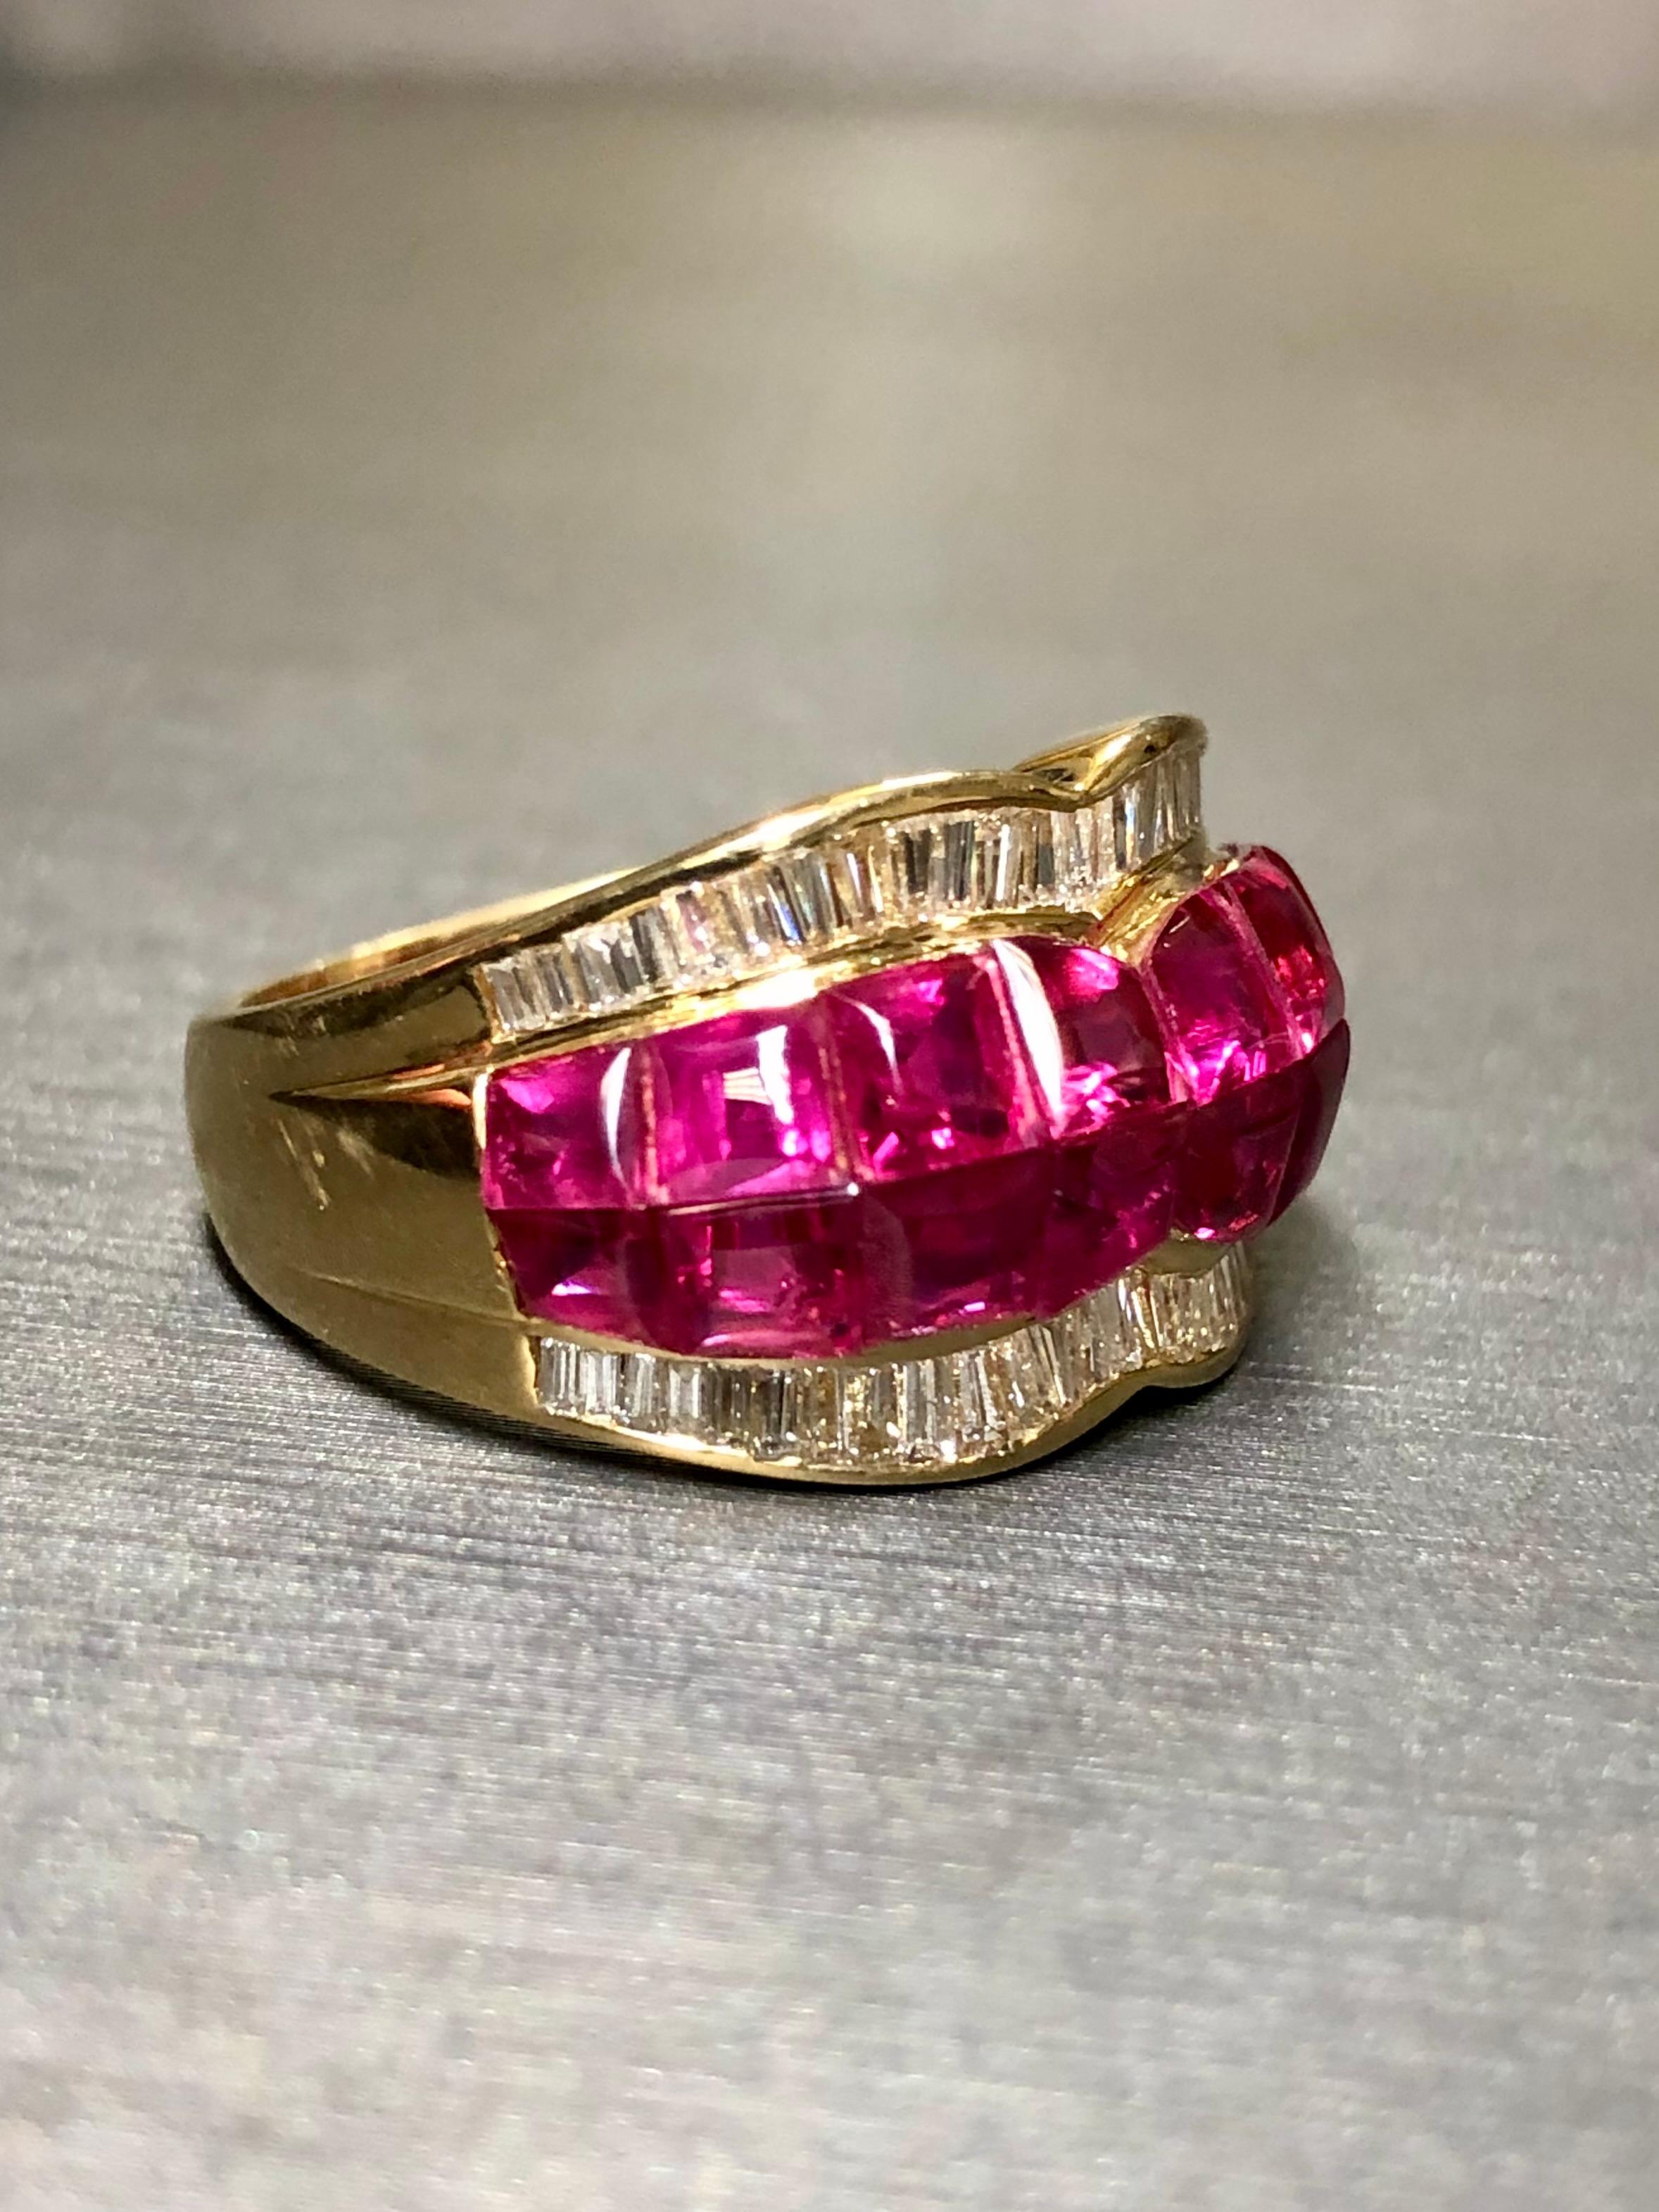 
A beautifully made ring invisibly set with approximately 5cttw in large buff top natural rubies as well as 1.30cttw in H-I color Vs1-2 clarity tapered baguette diamonds. An elegant and unique addition to any collection.



*All items are tested for